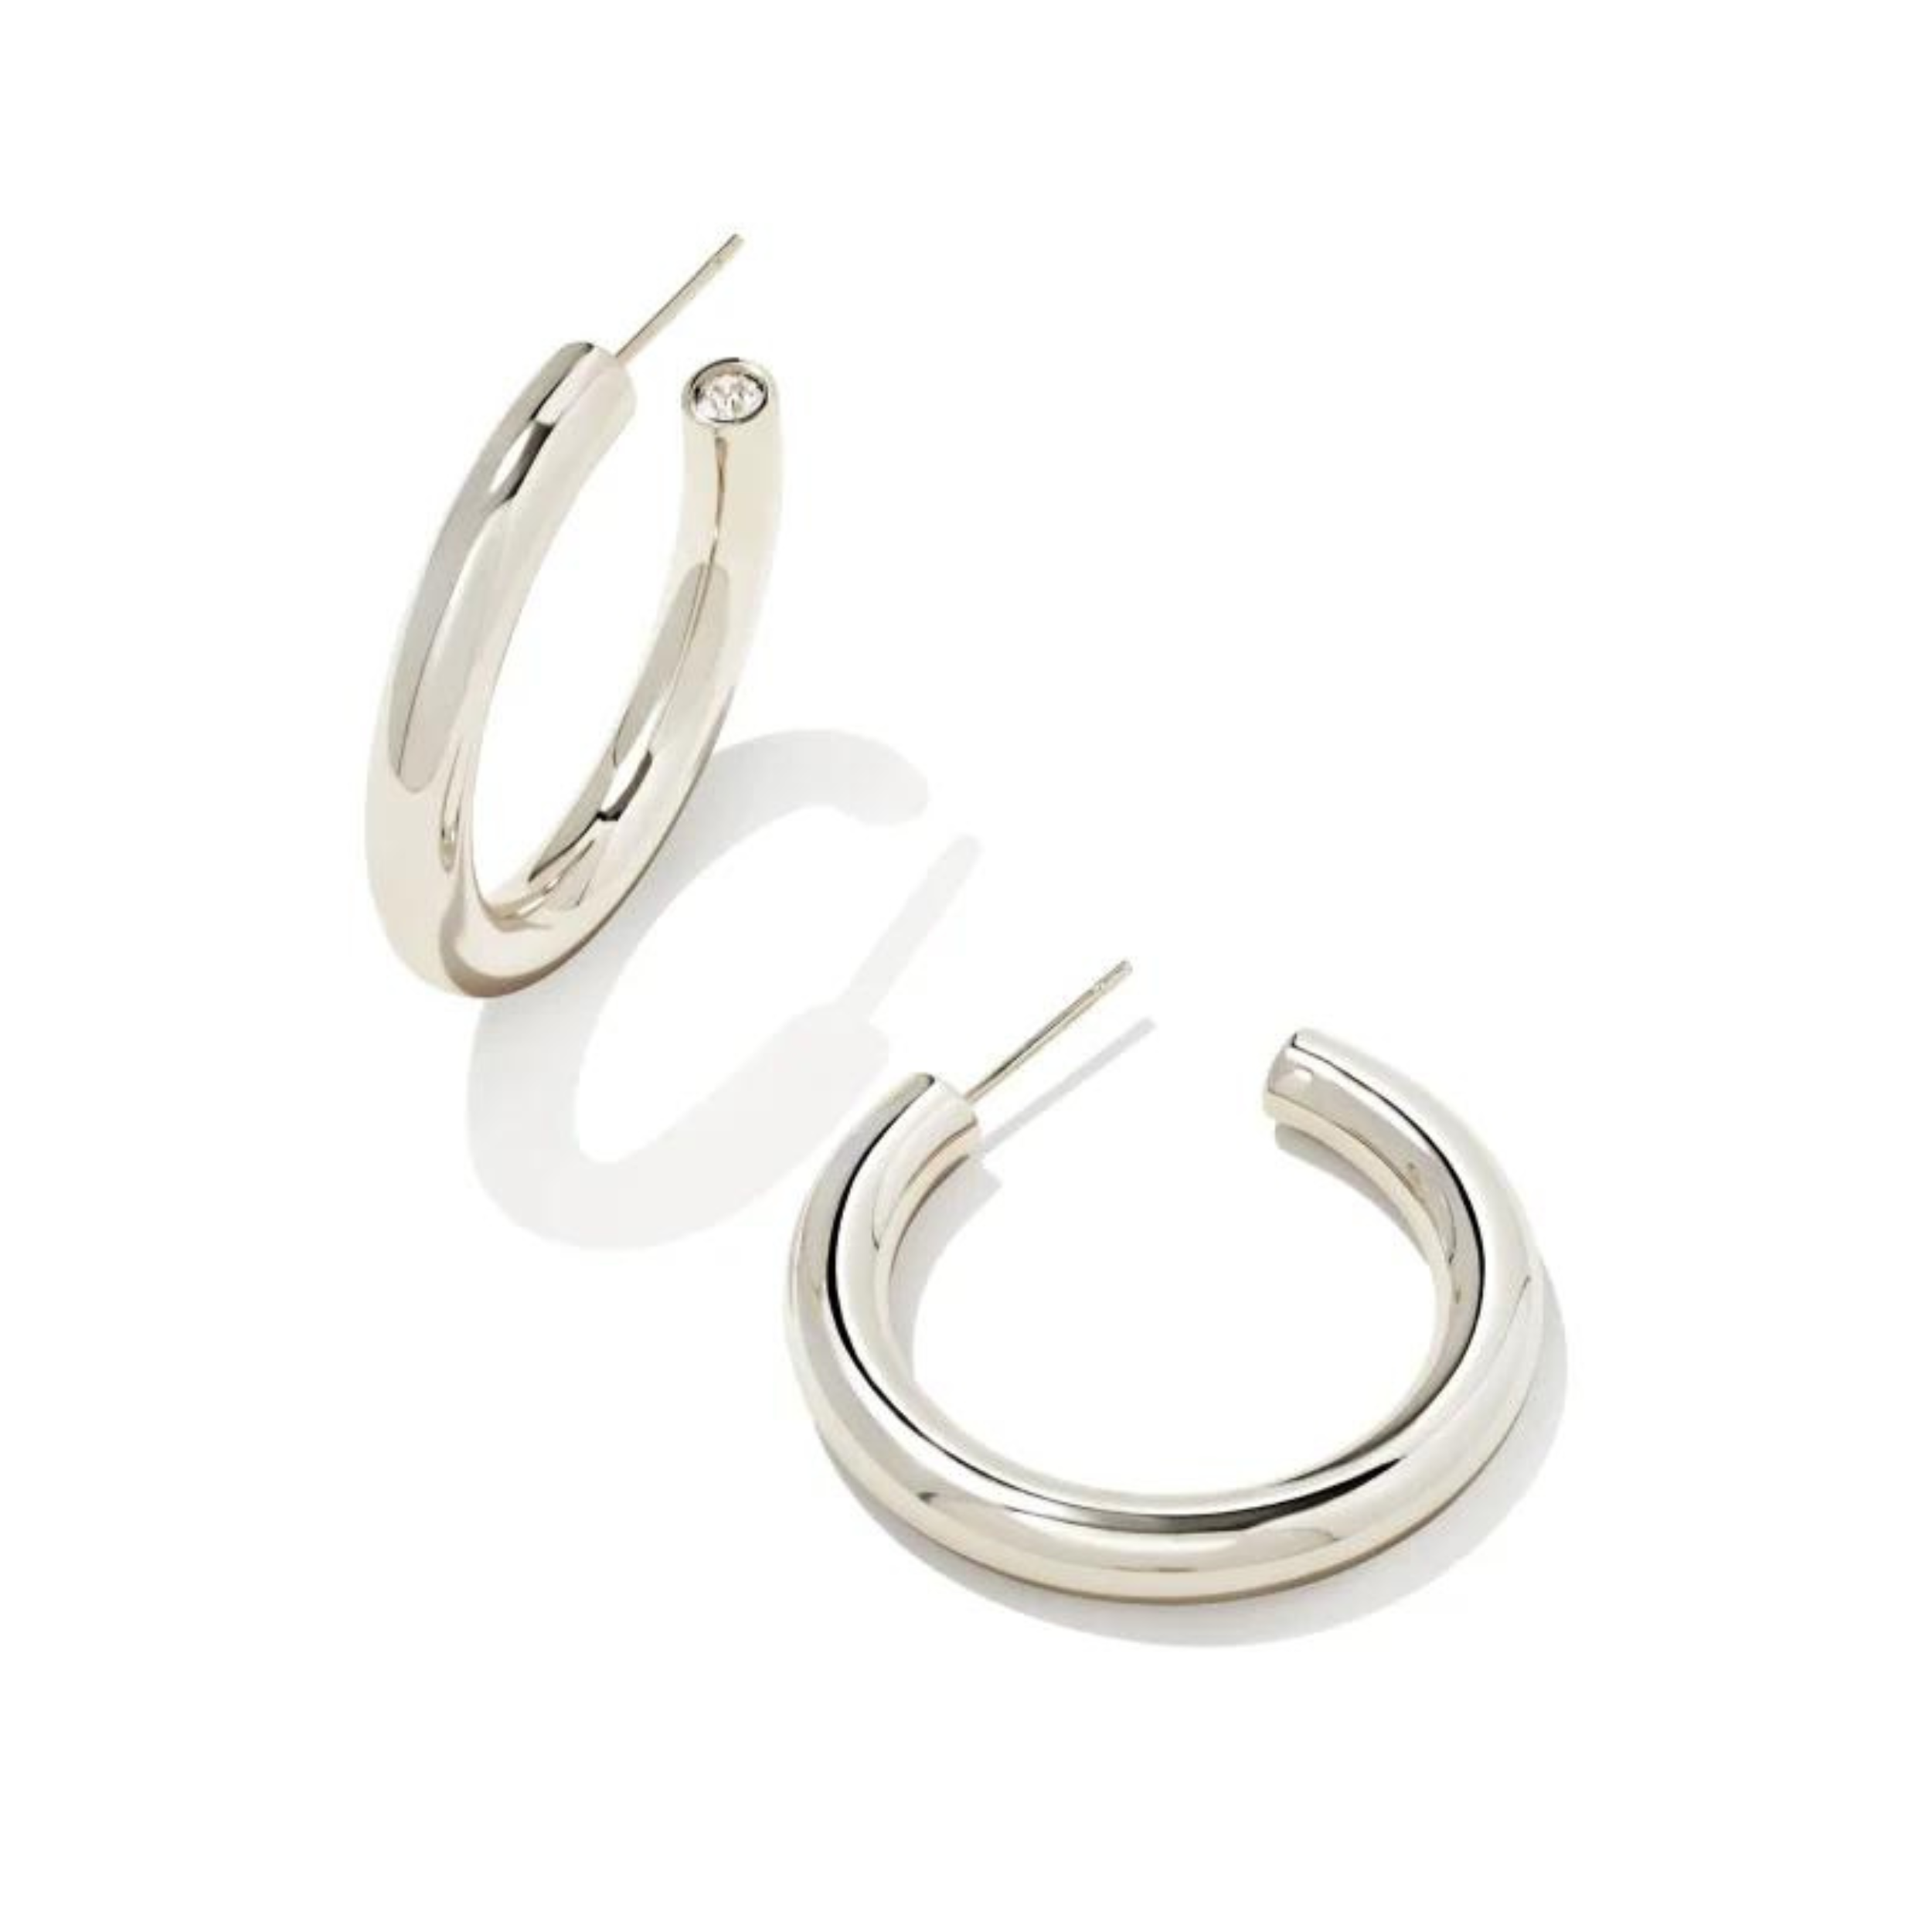 Silver hoop earrings pictured on a white background.